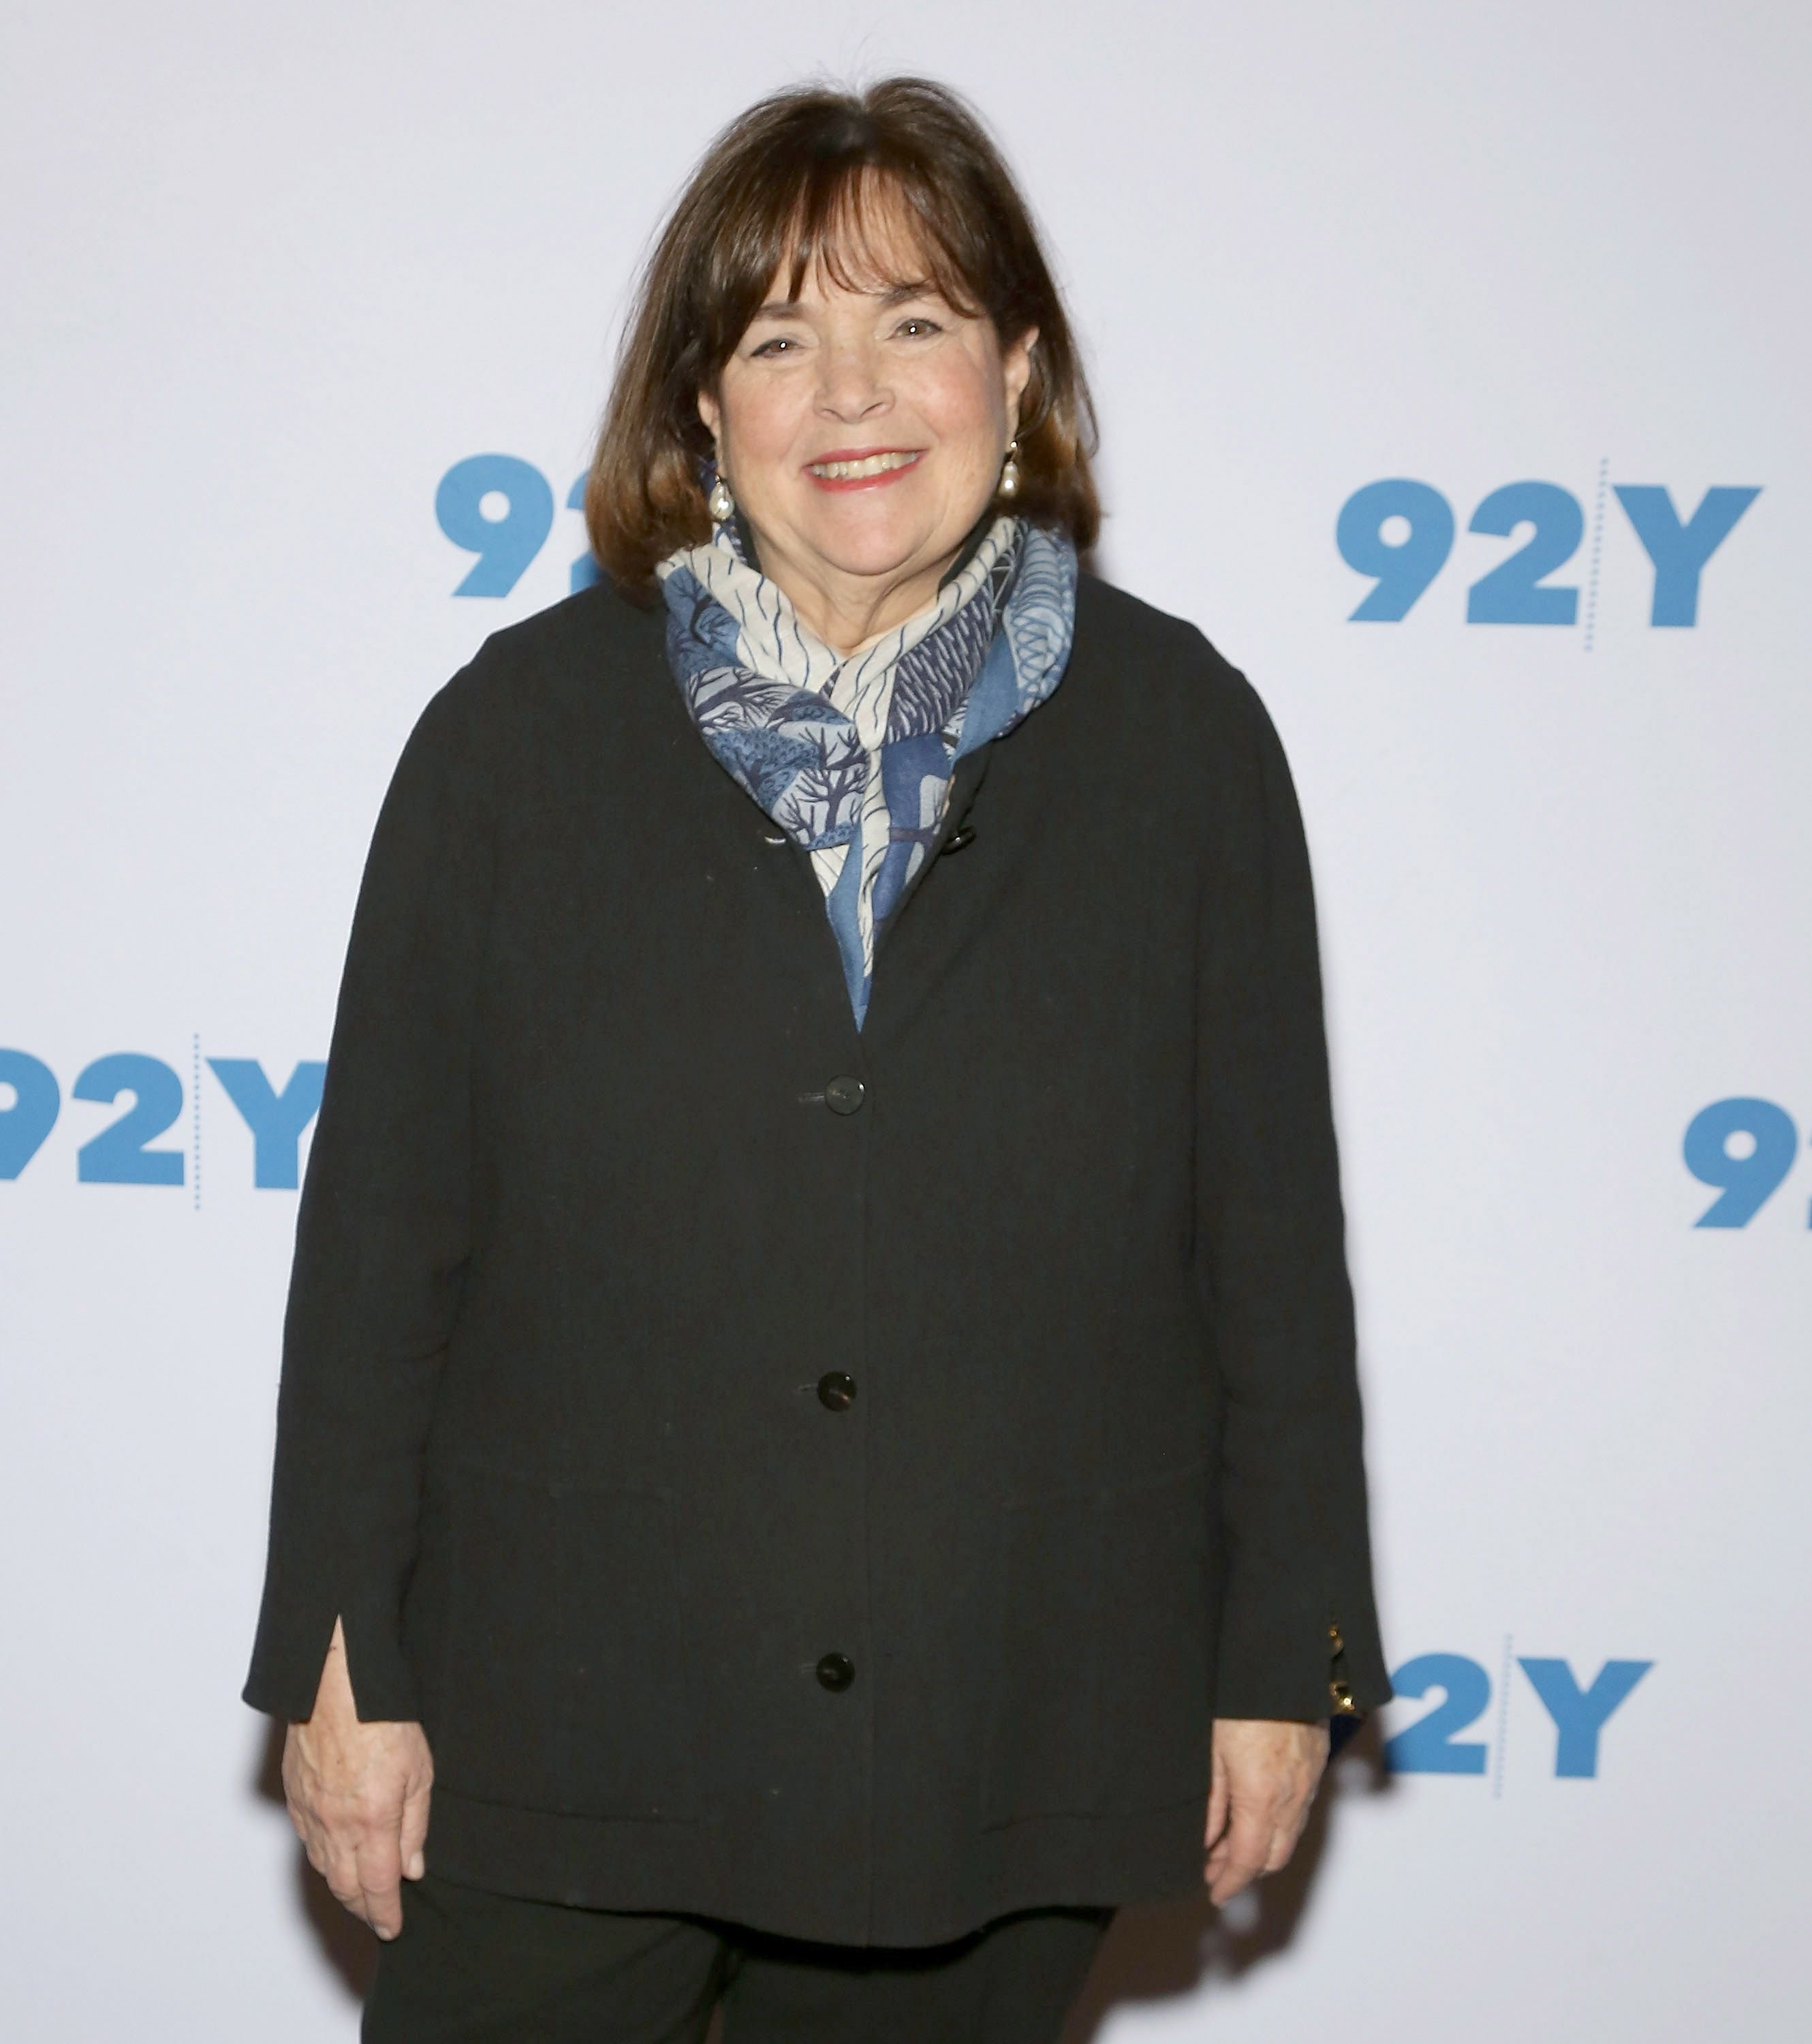 Ina Garten attends Ina Garten in Conversation with Danny Meyer at 92nd Street Y on January 31, 2017. | Photo: Getty Images.